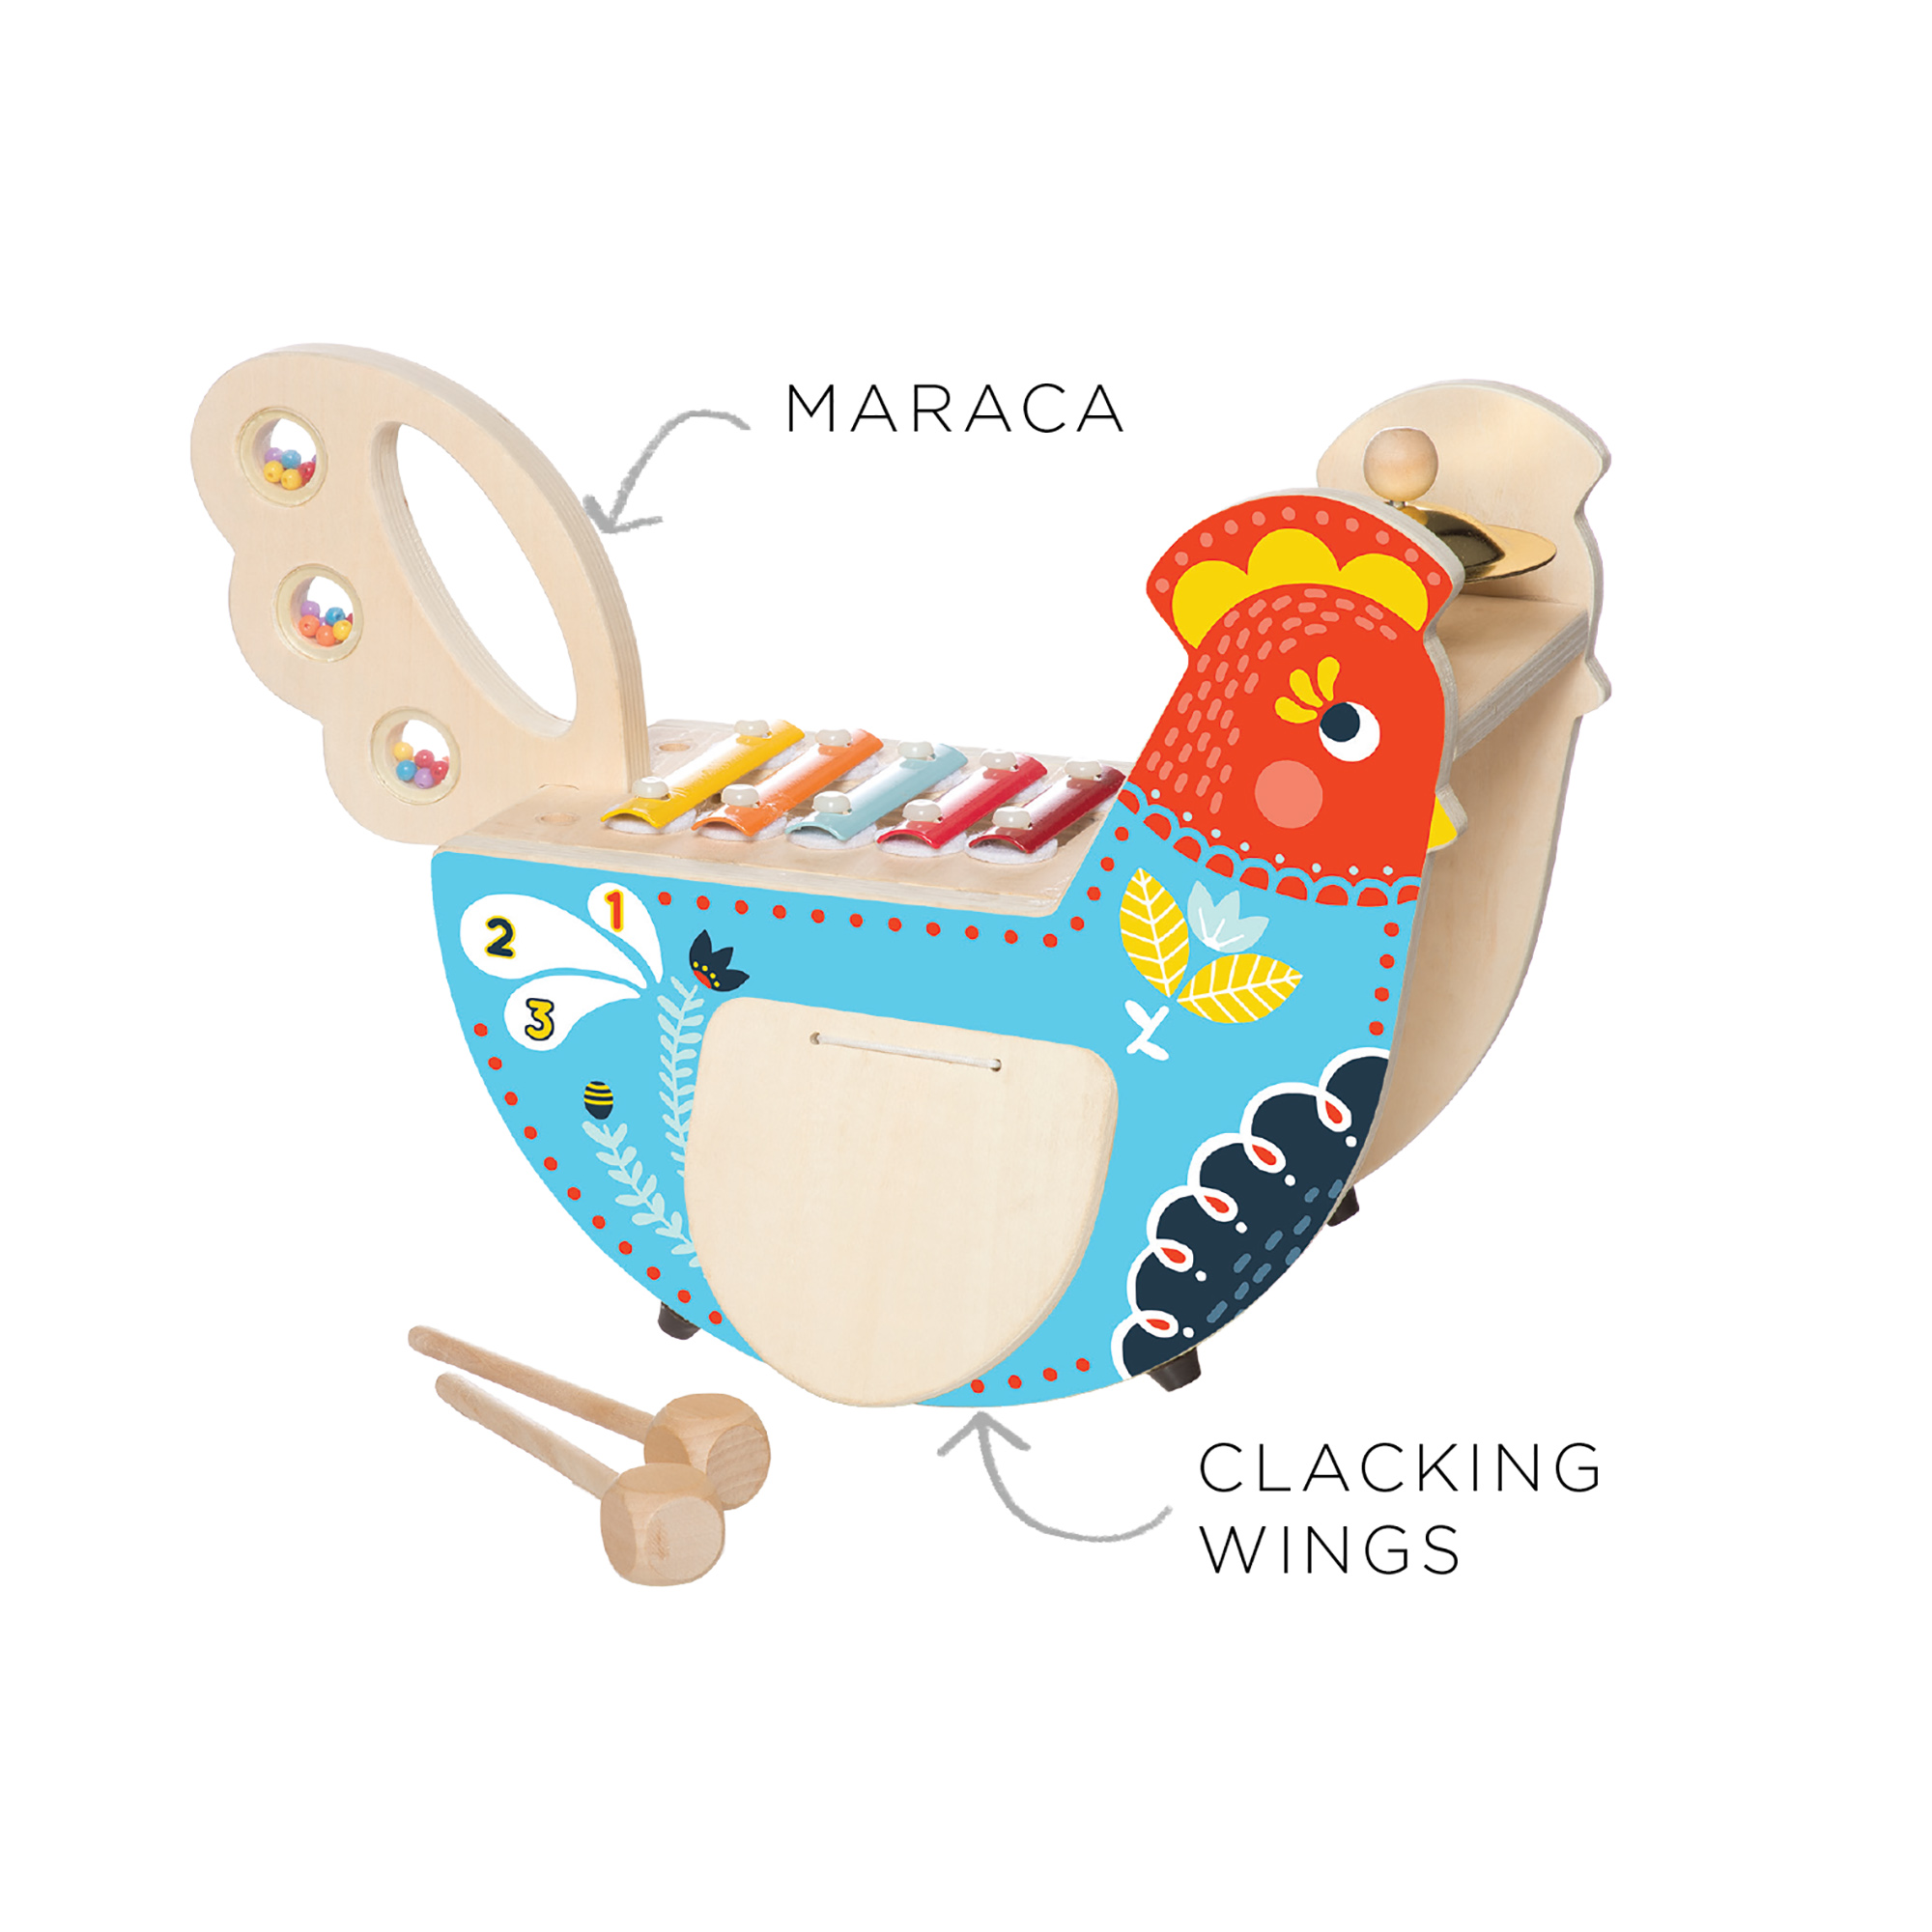 Manhattan Toy Musical Chicken Wooden Instrument for Toddlers with Xylophone, Drumsticks, Cymbal and Maraca - image 5 of 9